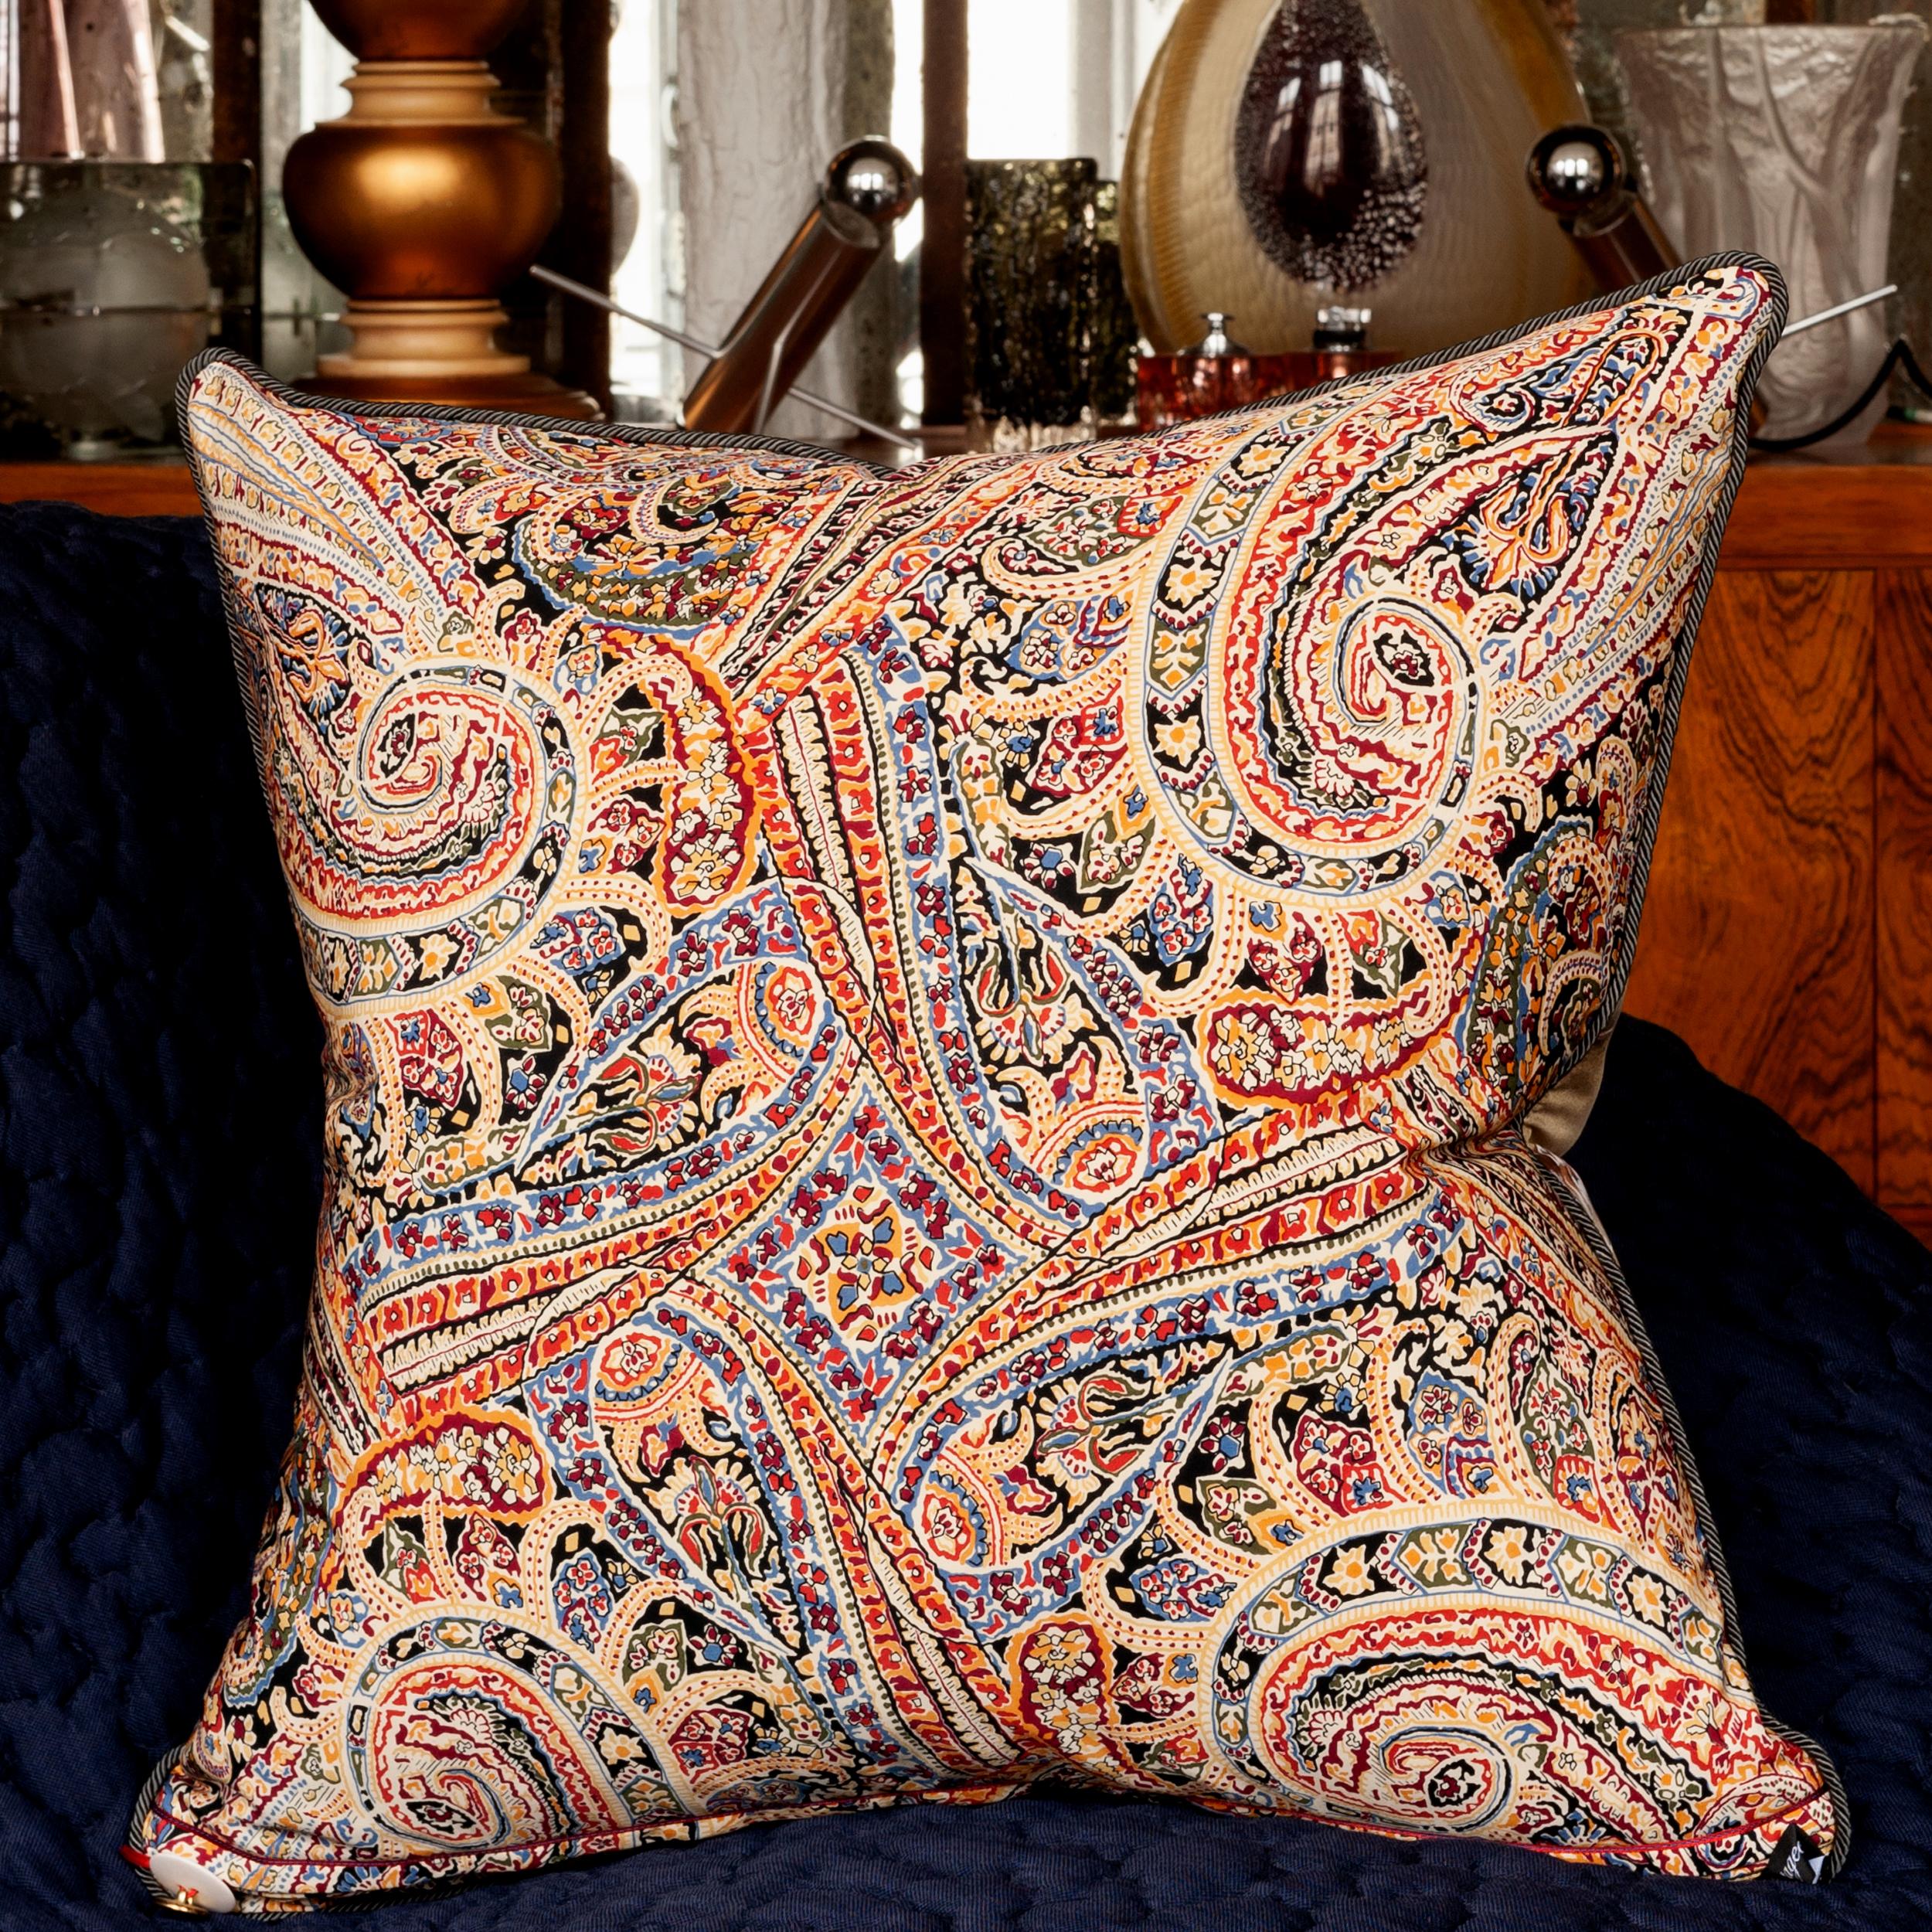 20th Century ‘Vintage Cushions’ Luxury Bespoke-Made Pillow 'The Foxes Tail', Made in London